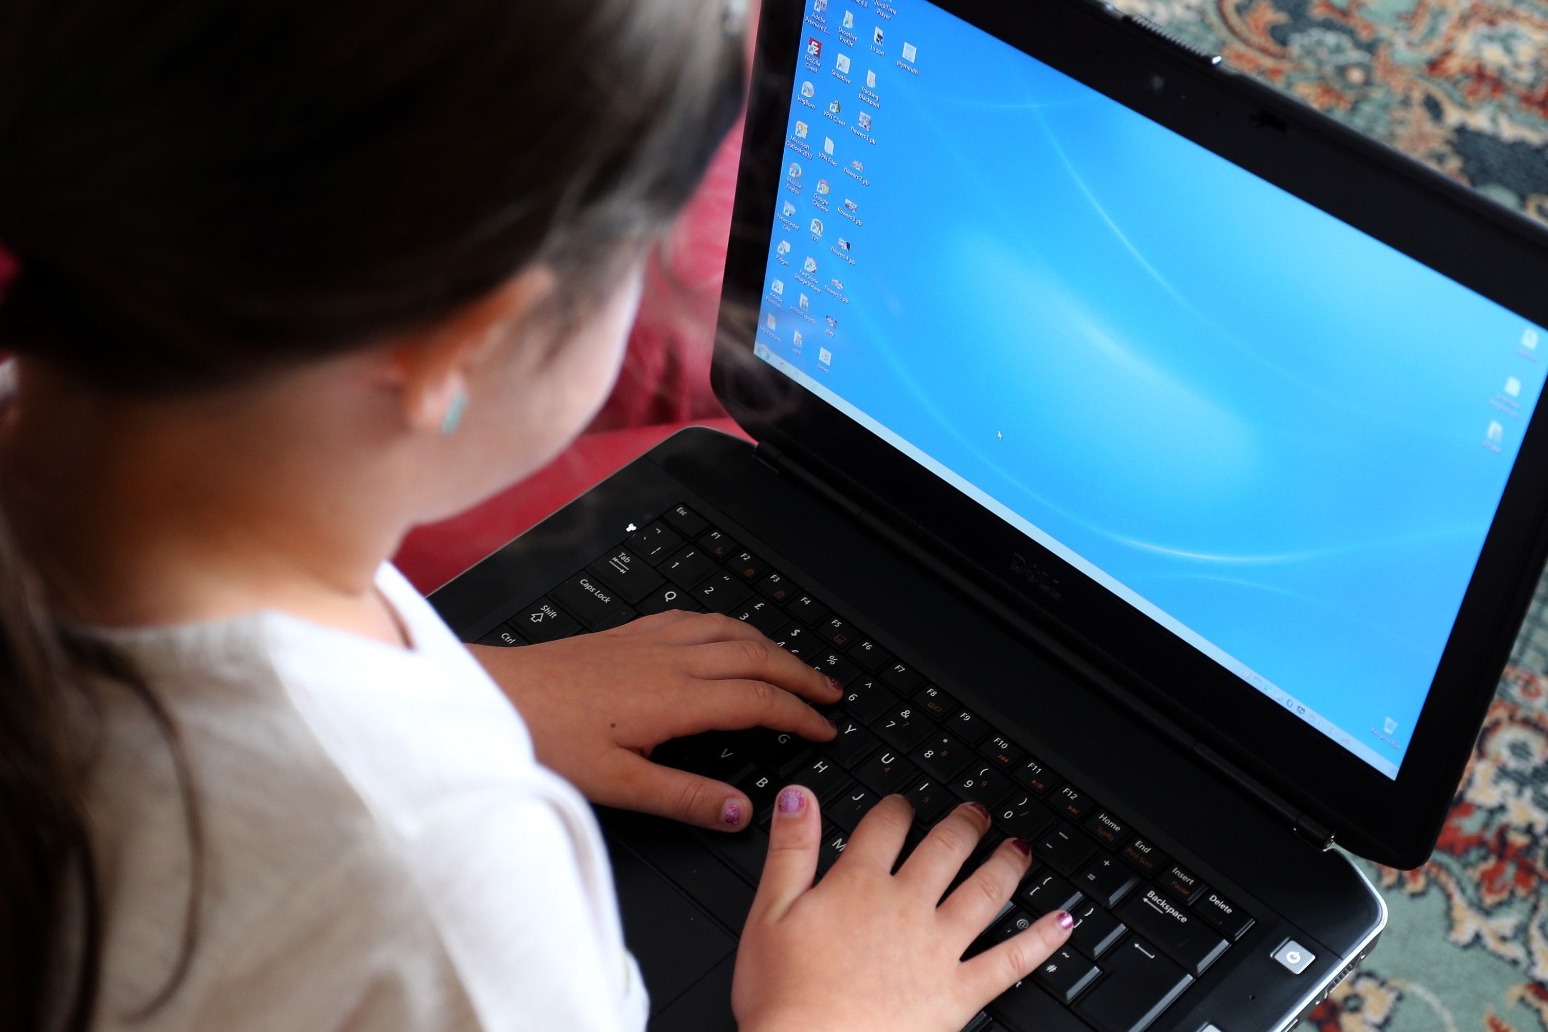 Warning of ‘tsunami of online child abuse’ as figures show grooming cases rise 